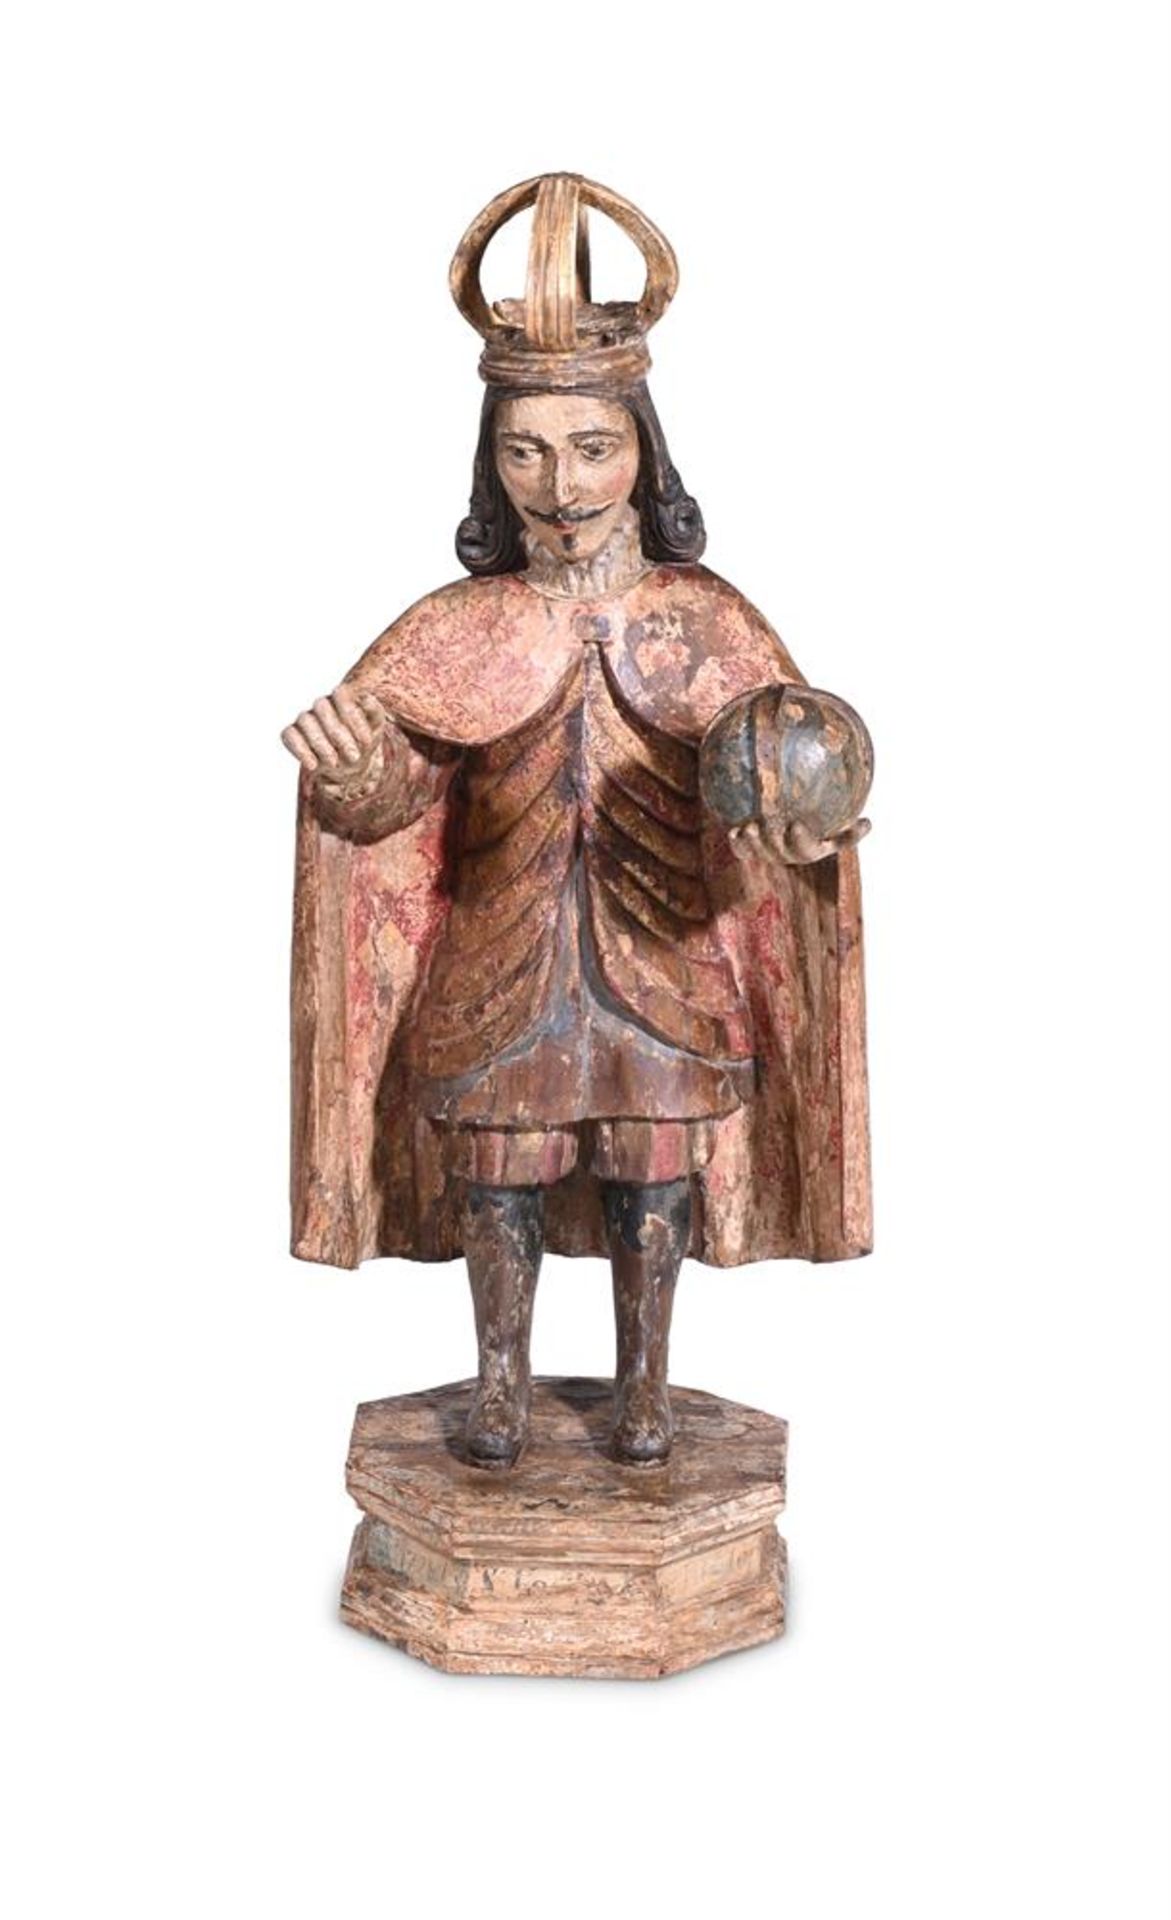 A CARVED POLYCHROME FIGURE OF A KING, DATED 1728